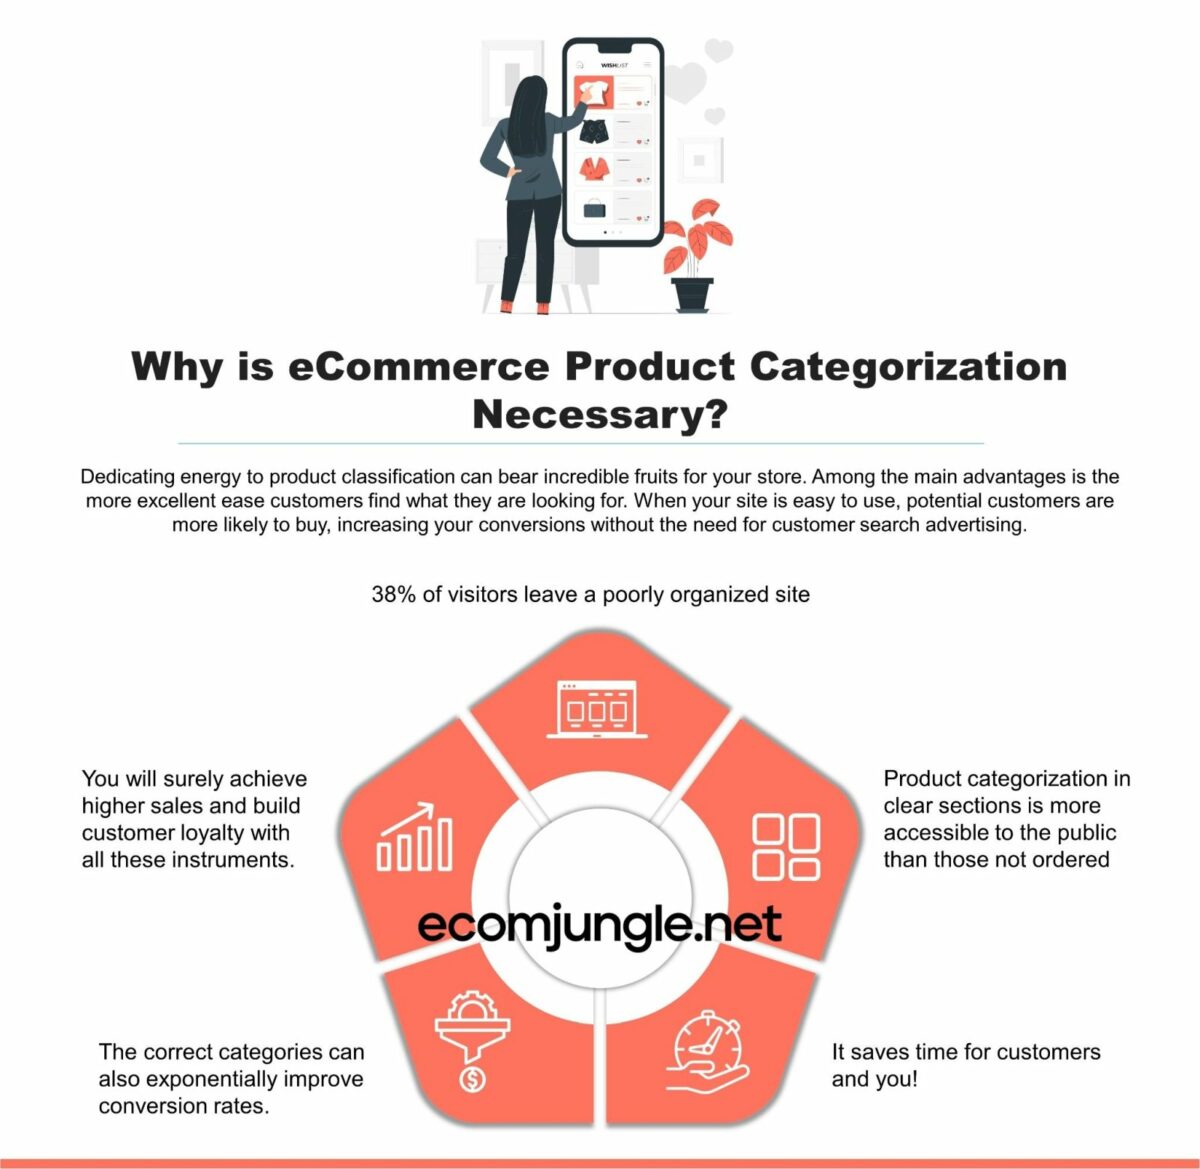 Why is eCommerce Product Categorization Necessary?